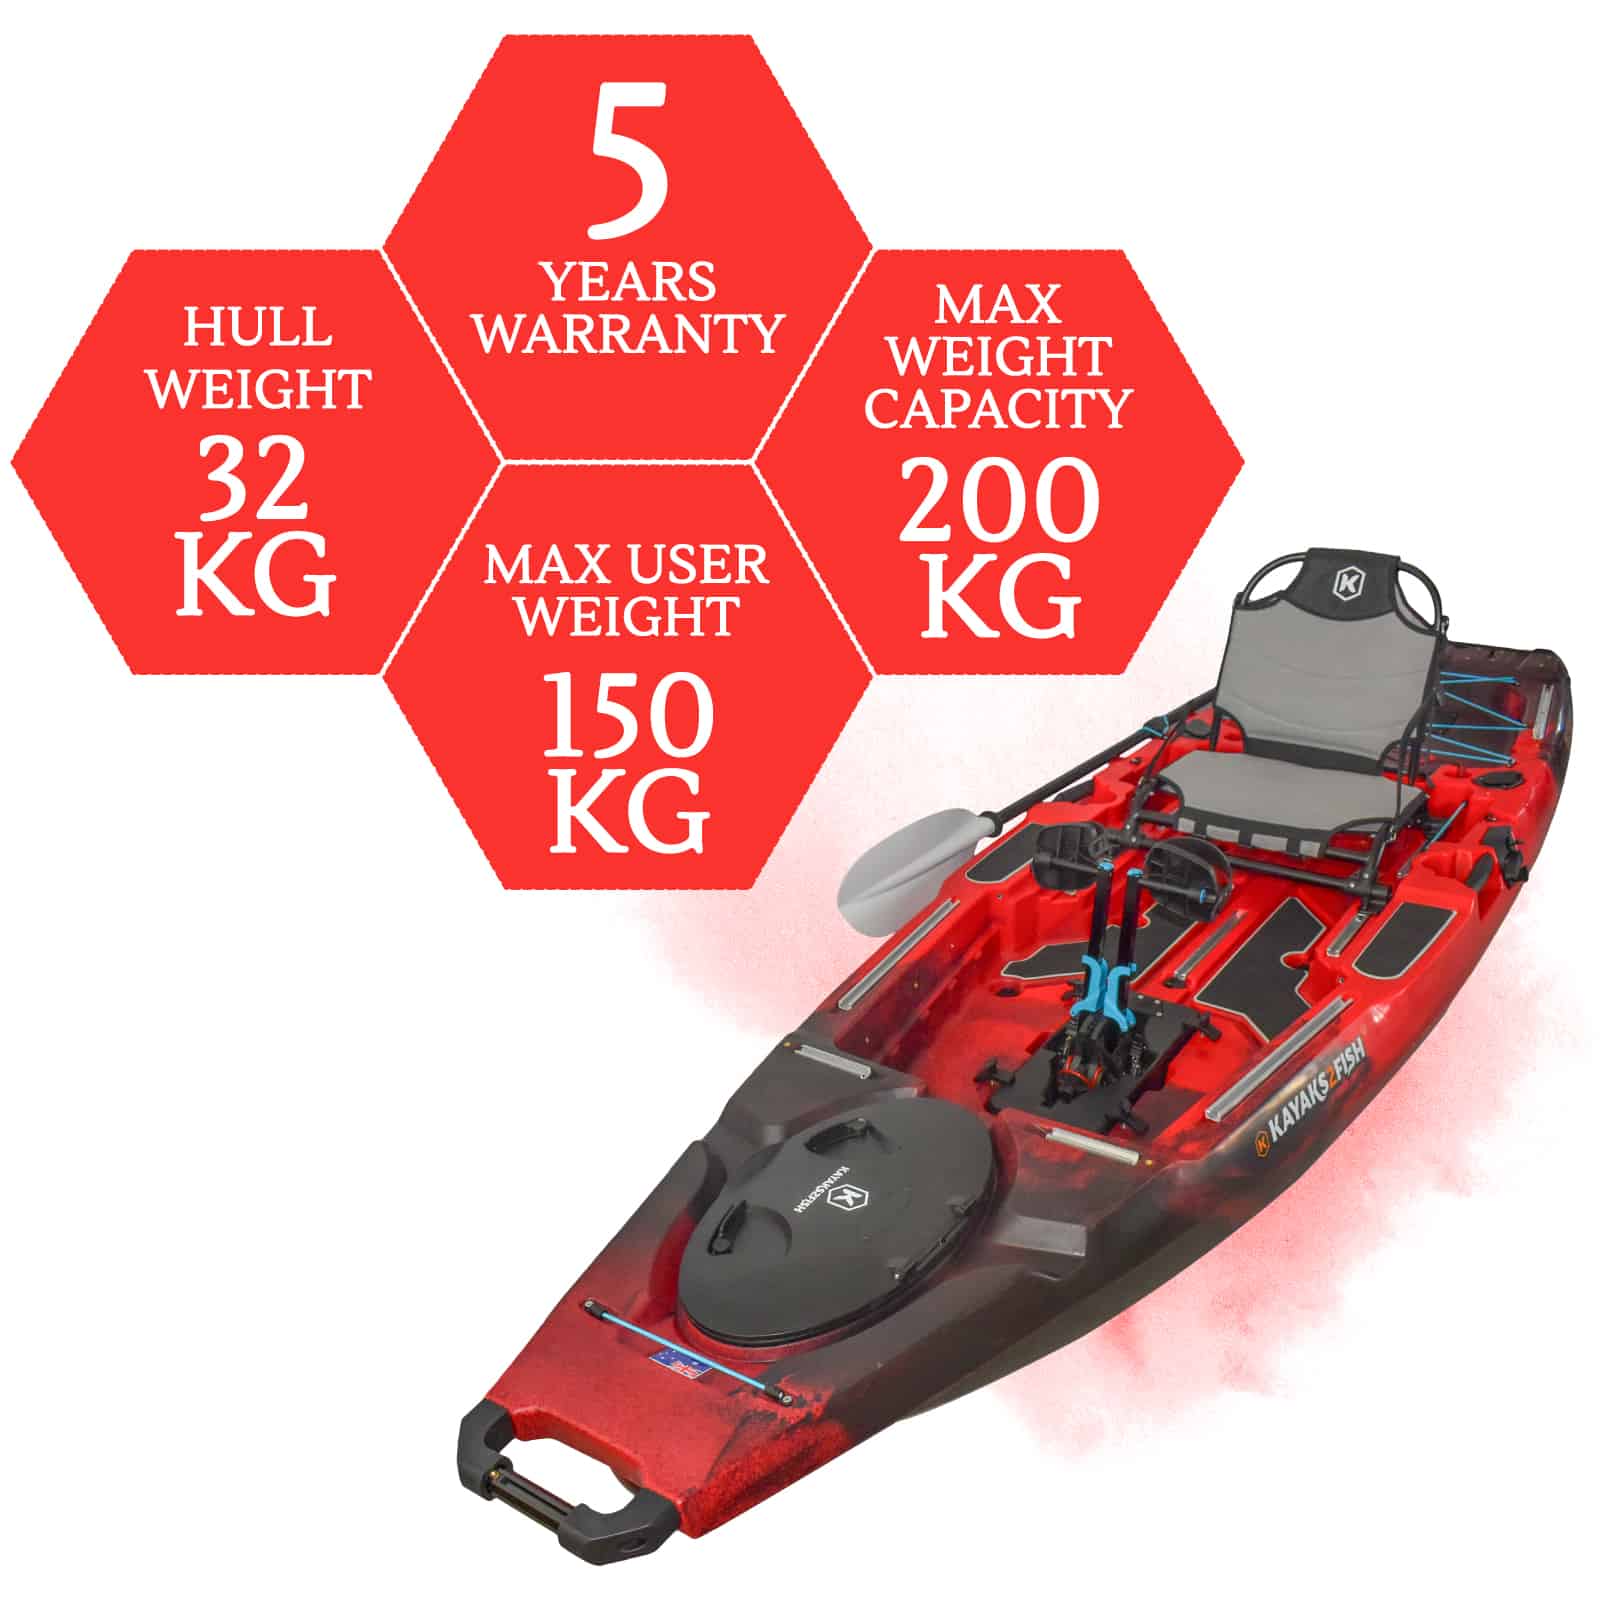 NG-11.5-FIREFLY-MAX specifications